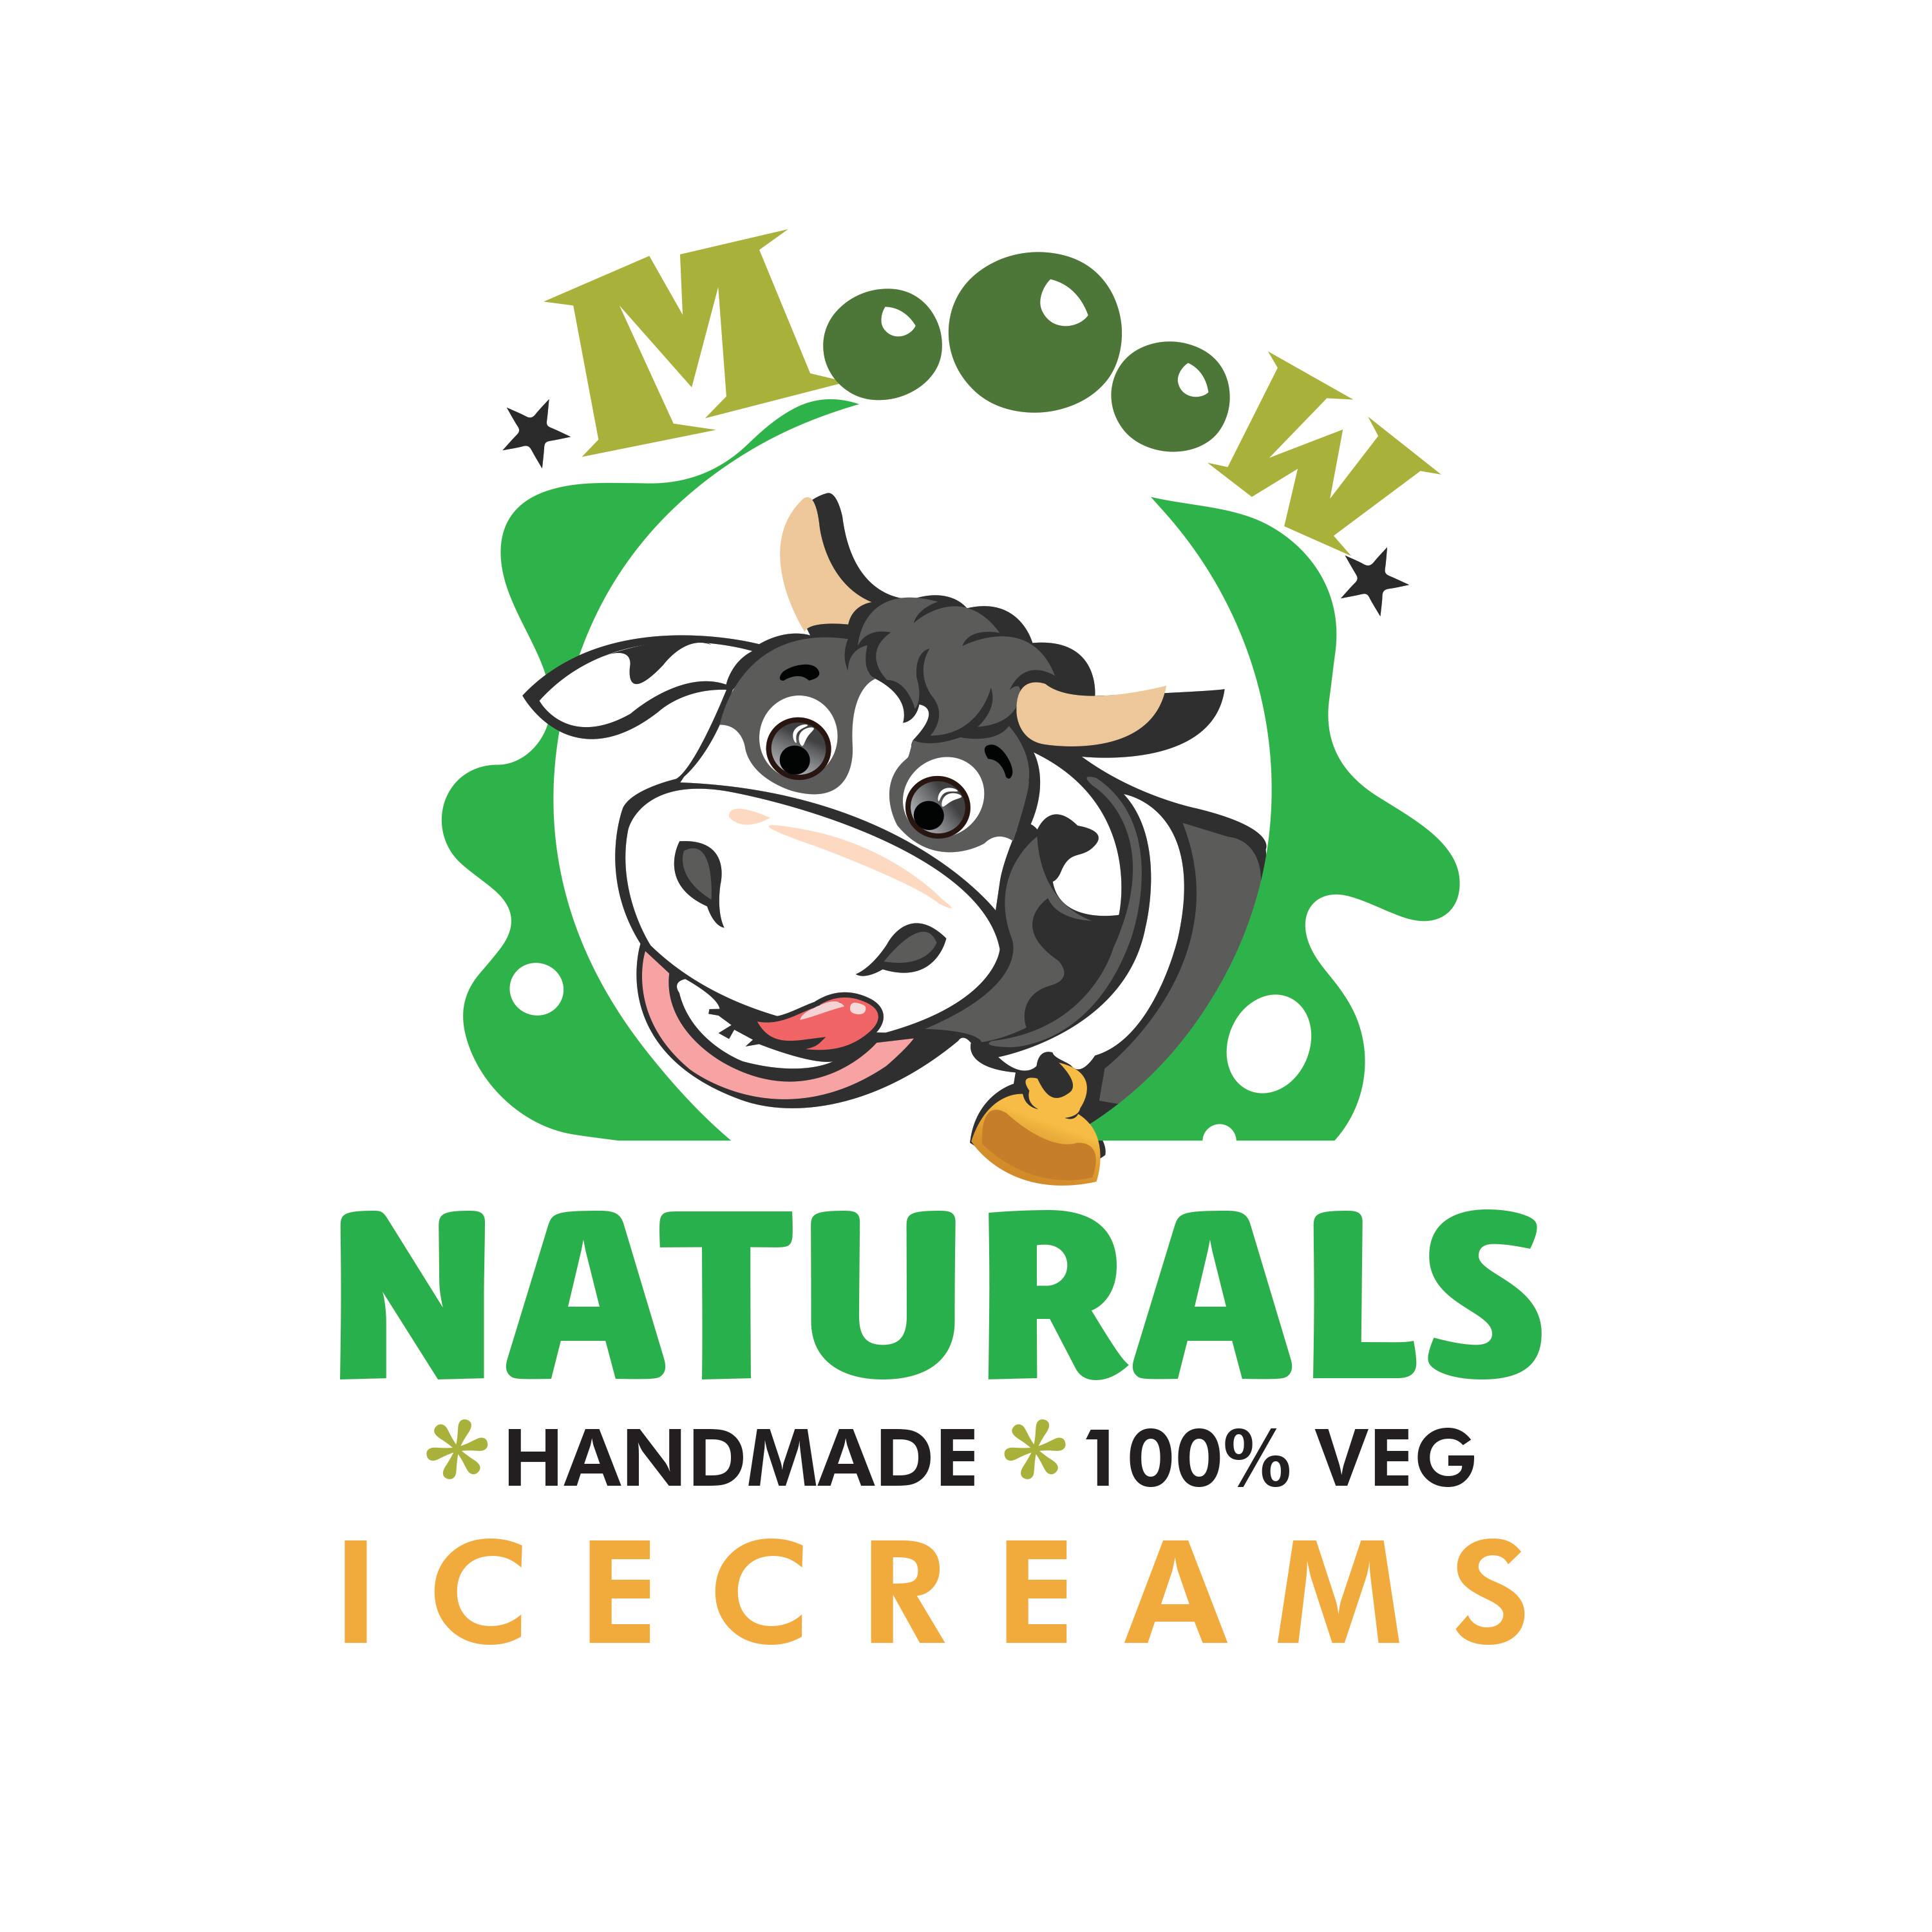 Best Ice Cream Franchise Businesses in India for 2021